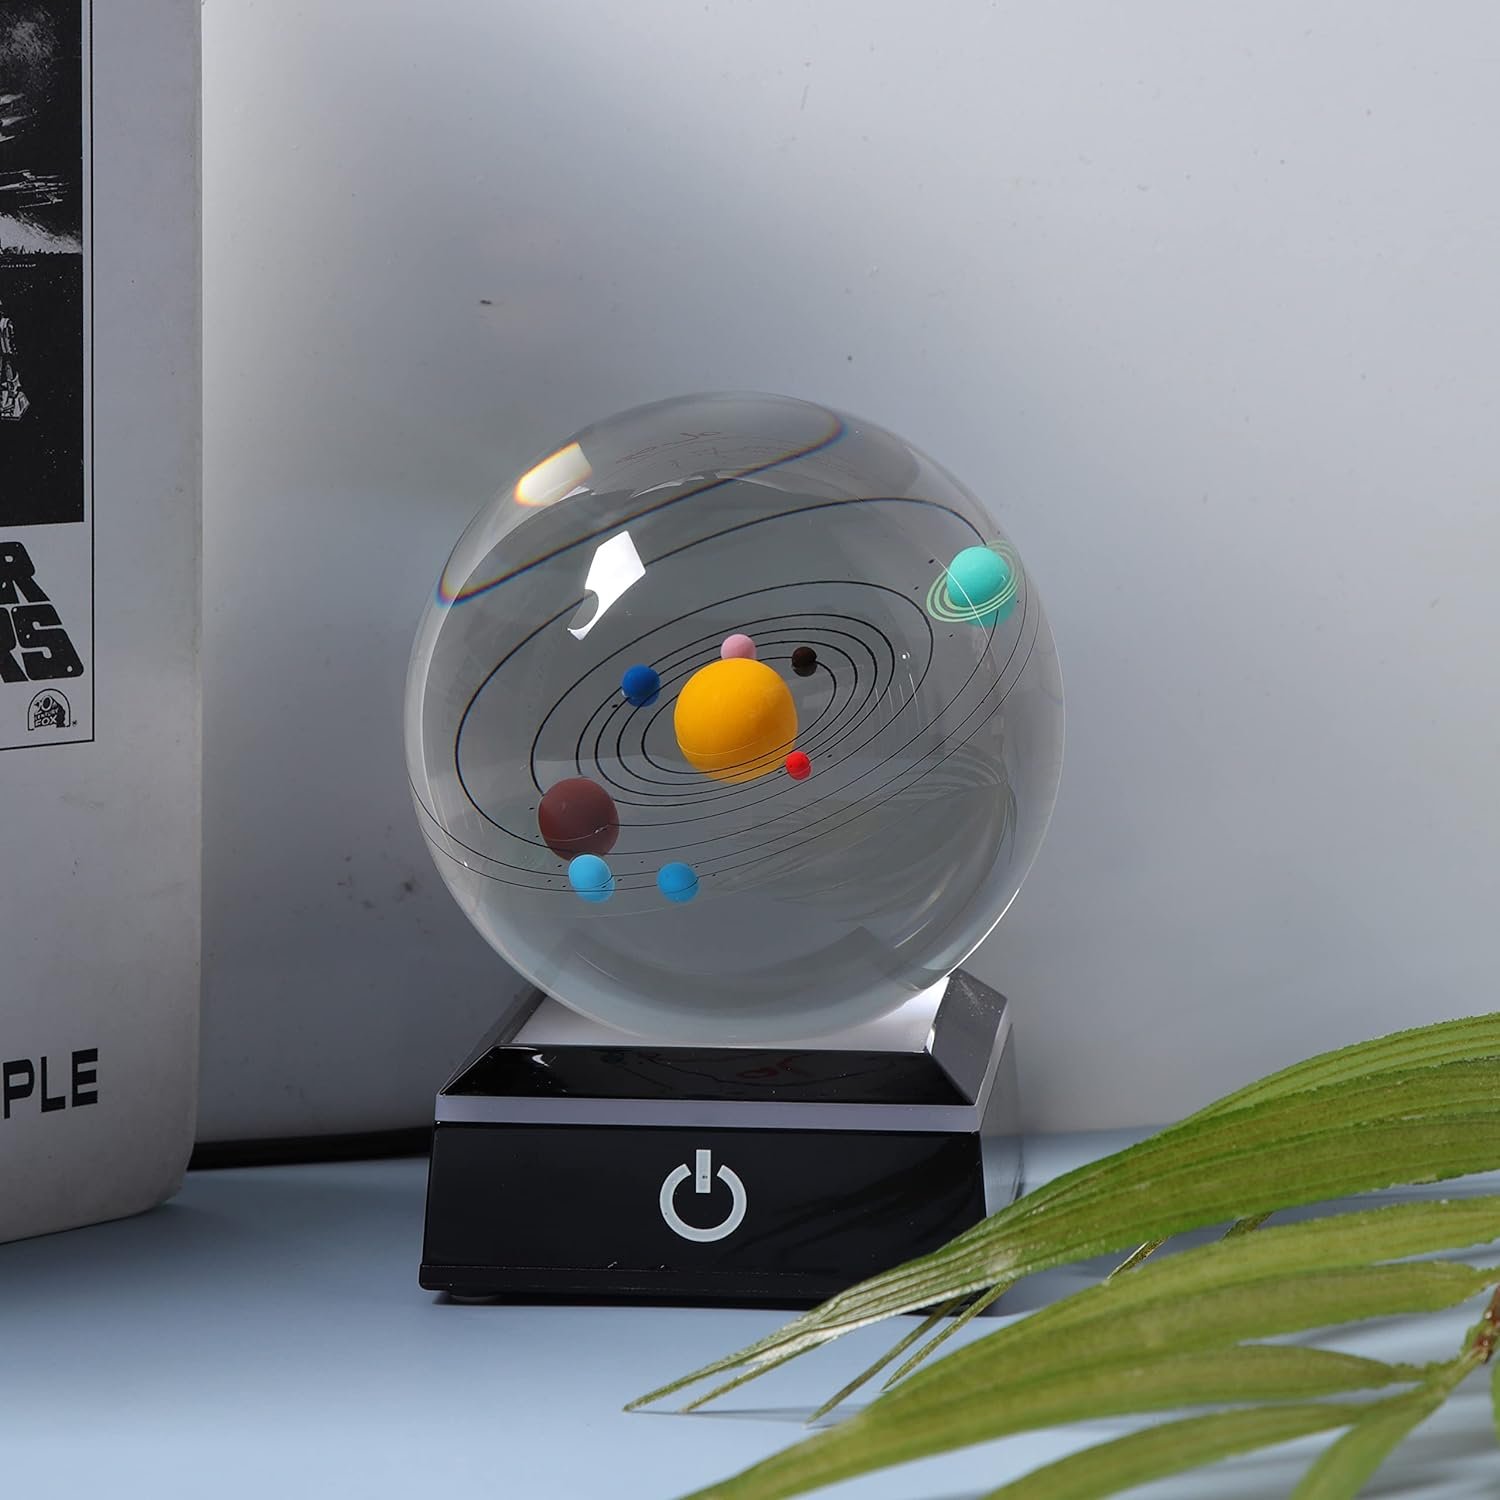 3D Crystal Ball with Solar System Model and LED Lamp Base Review: The Ultimate Gift for Astronomy Enthusiasts